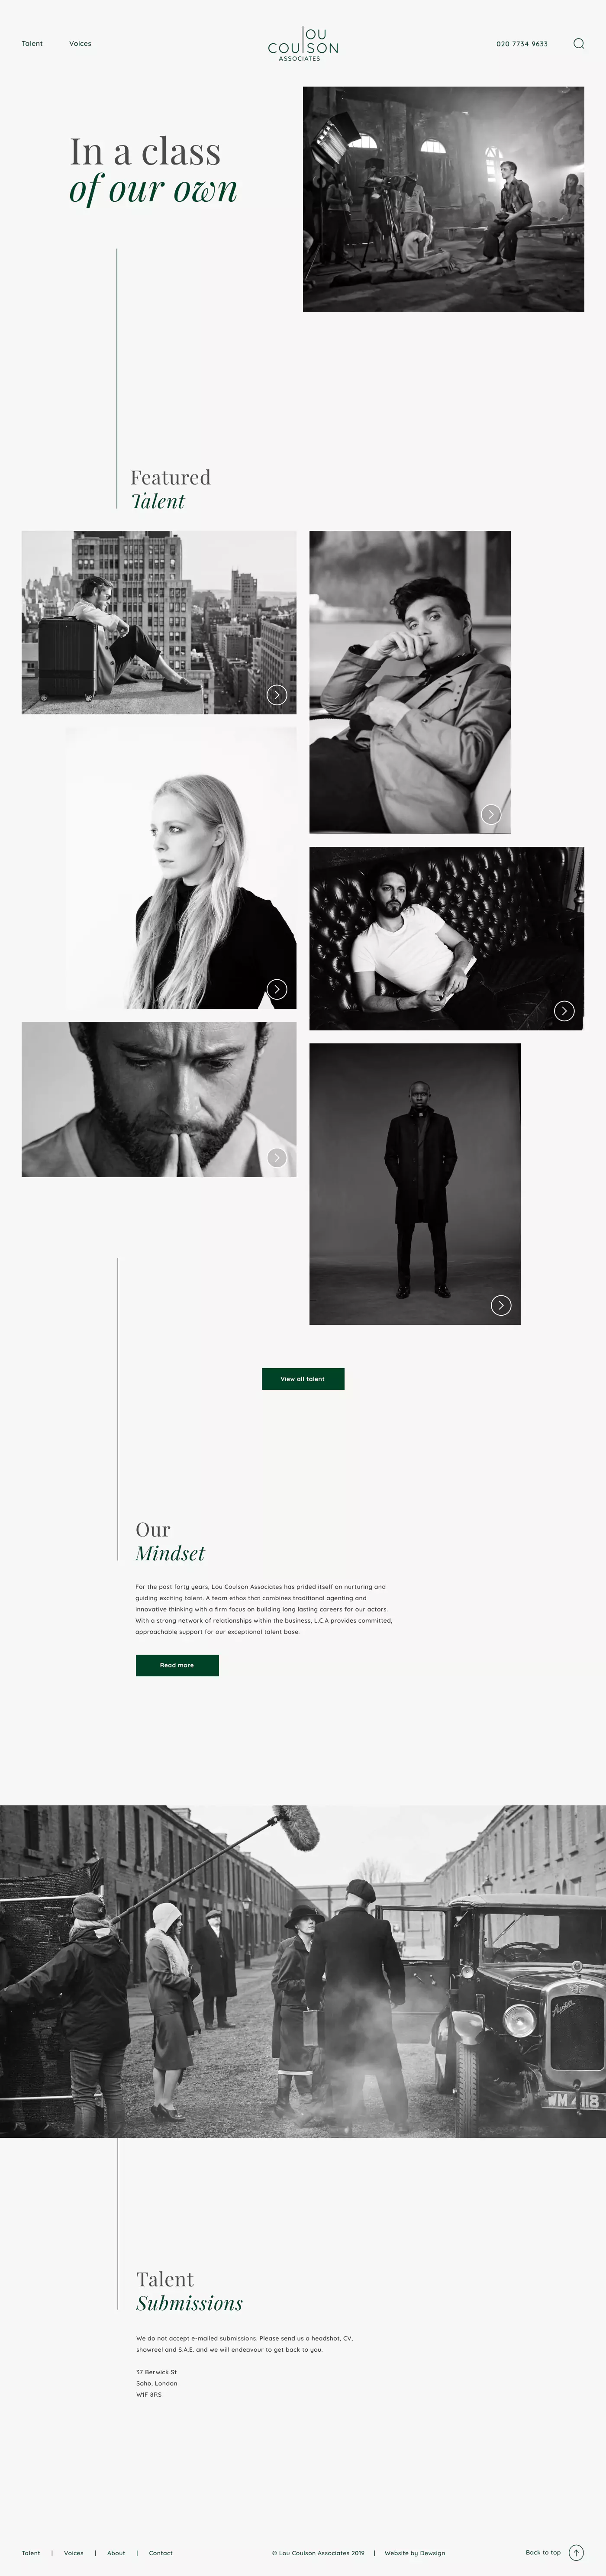 Lou Coulsons homepage website design